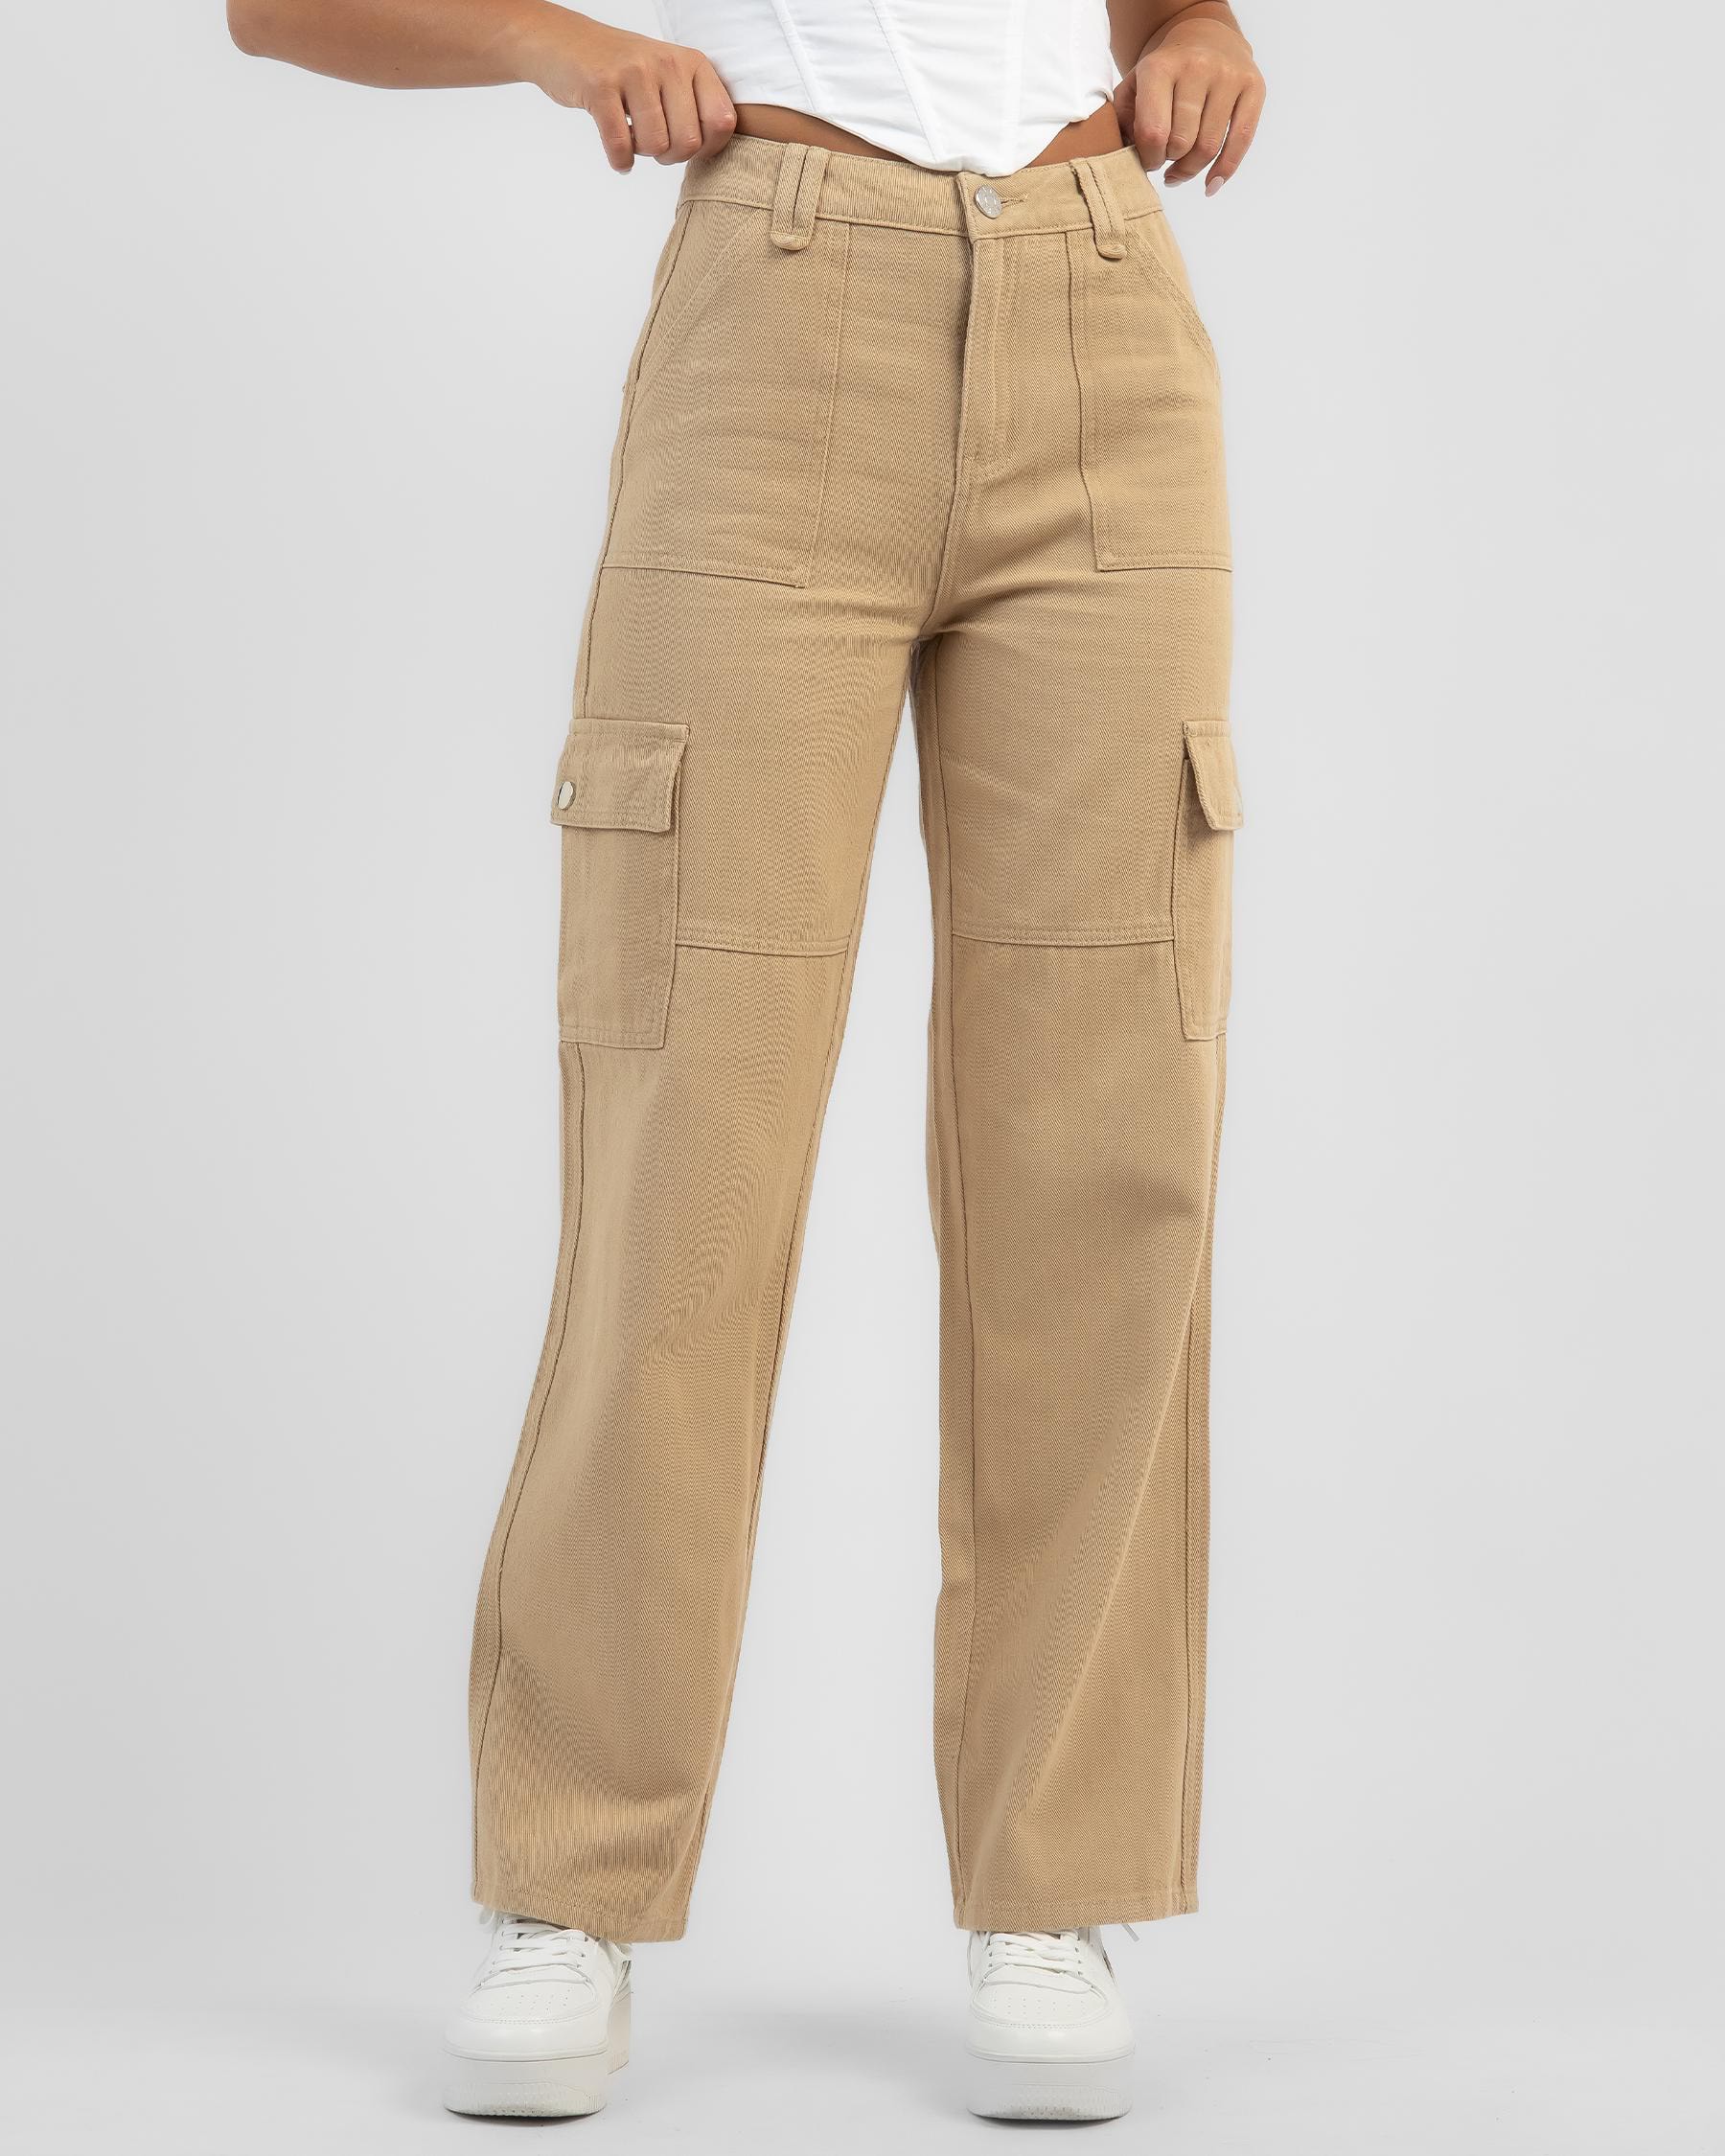 Shop DESU Naomi Jeans In Almond - Fast Shipping & Easy Returns - City ...